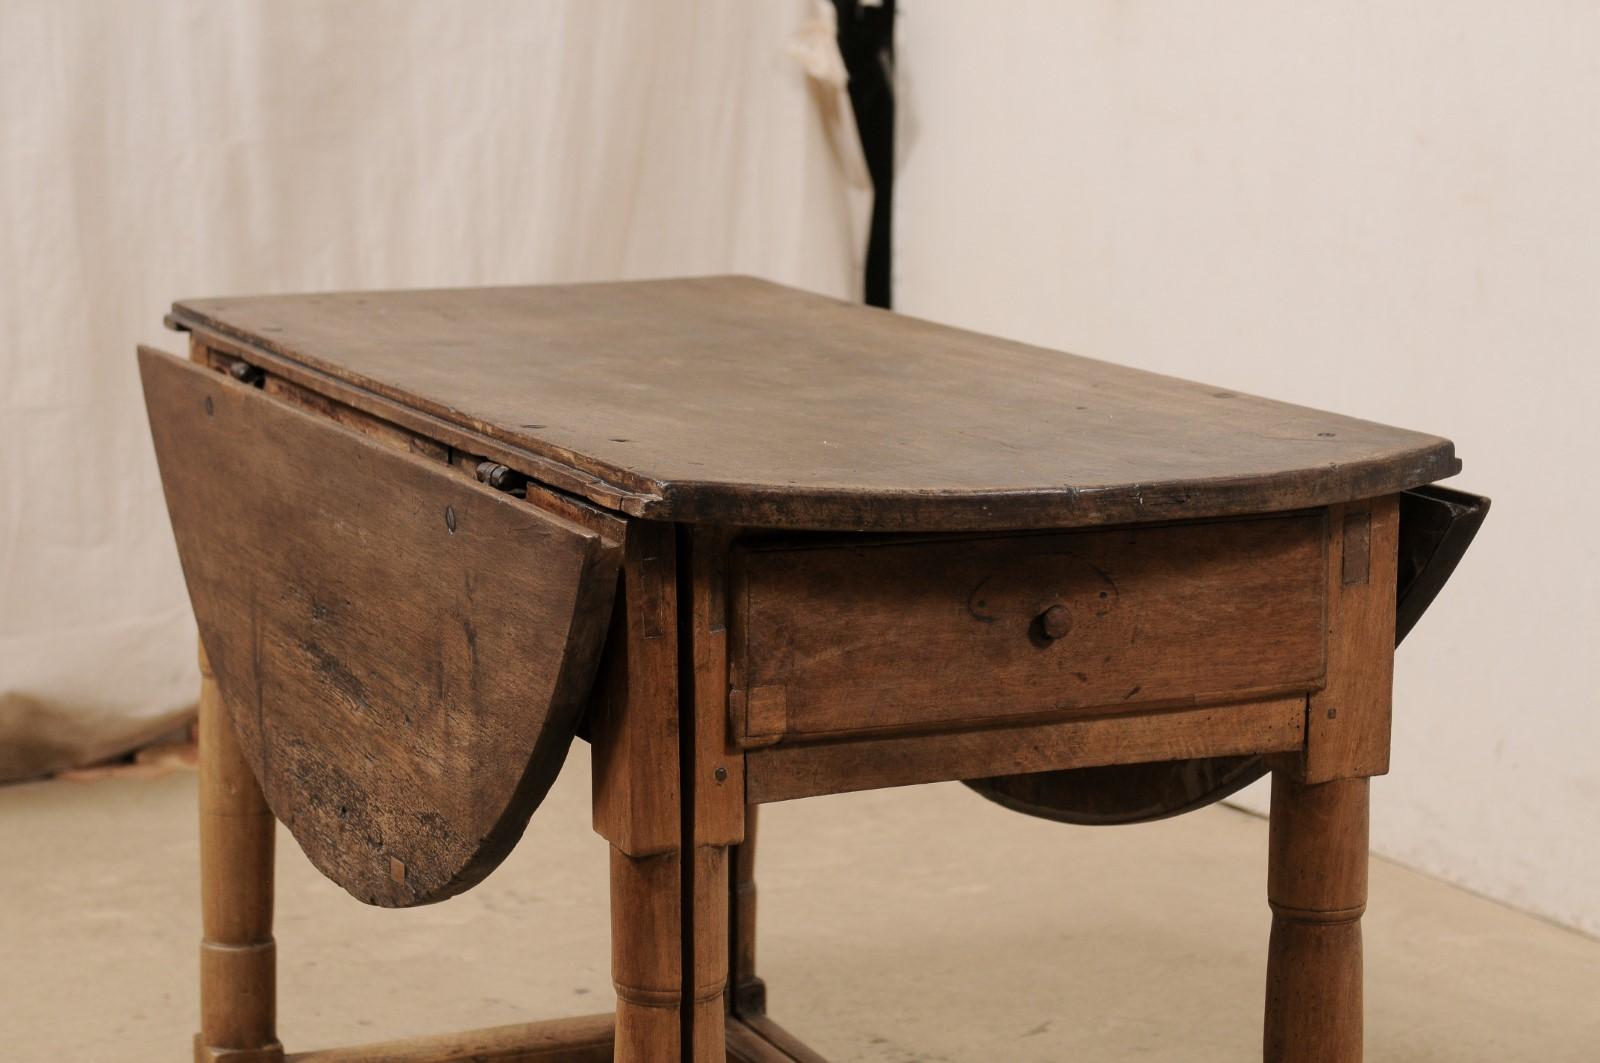 Italian Double Gate-Leg Table w/Drop Leaves on Either Side, Turn of 18th/19th C. For Sale 6